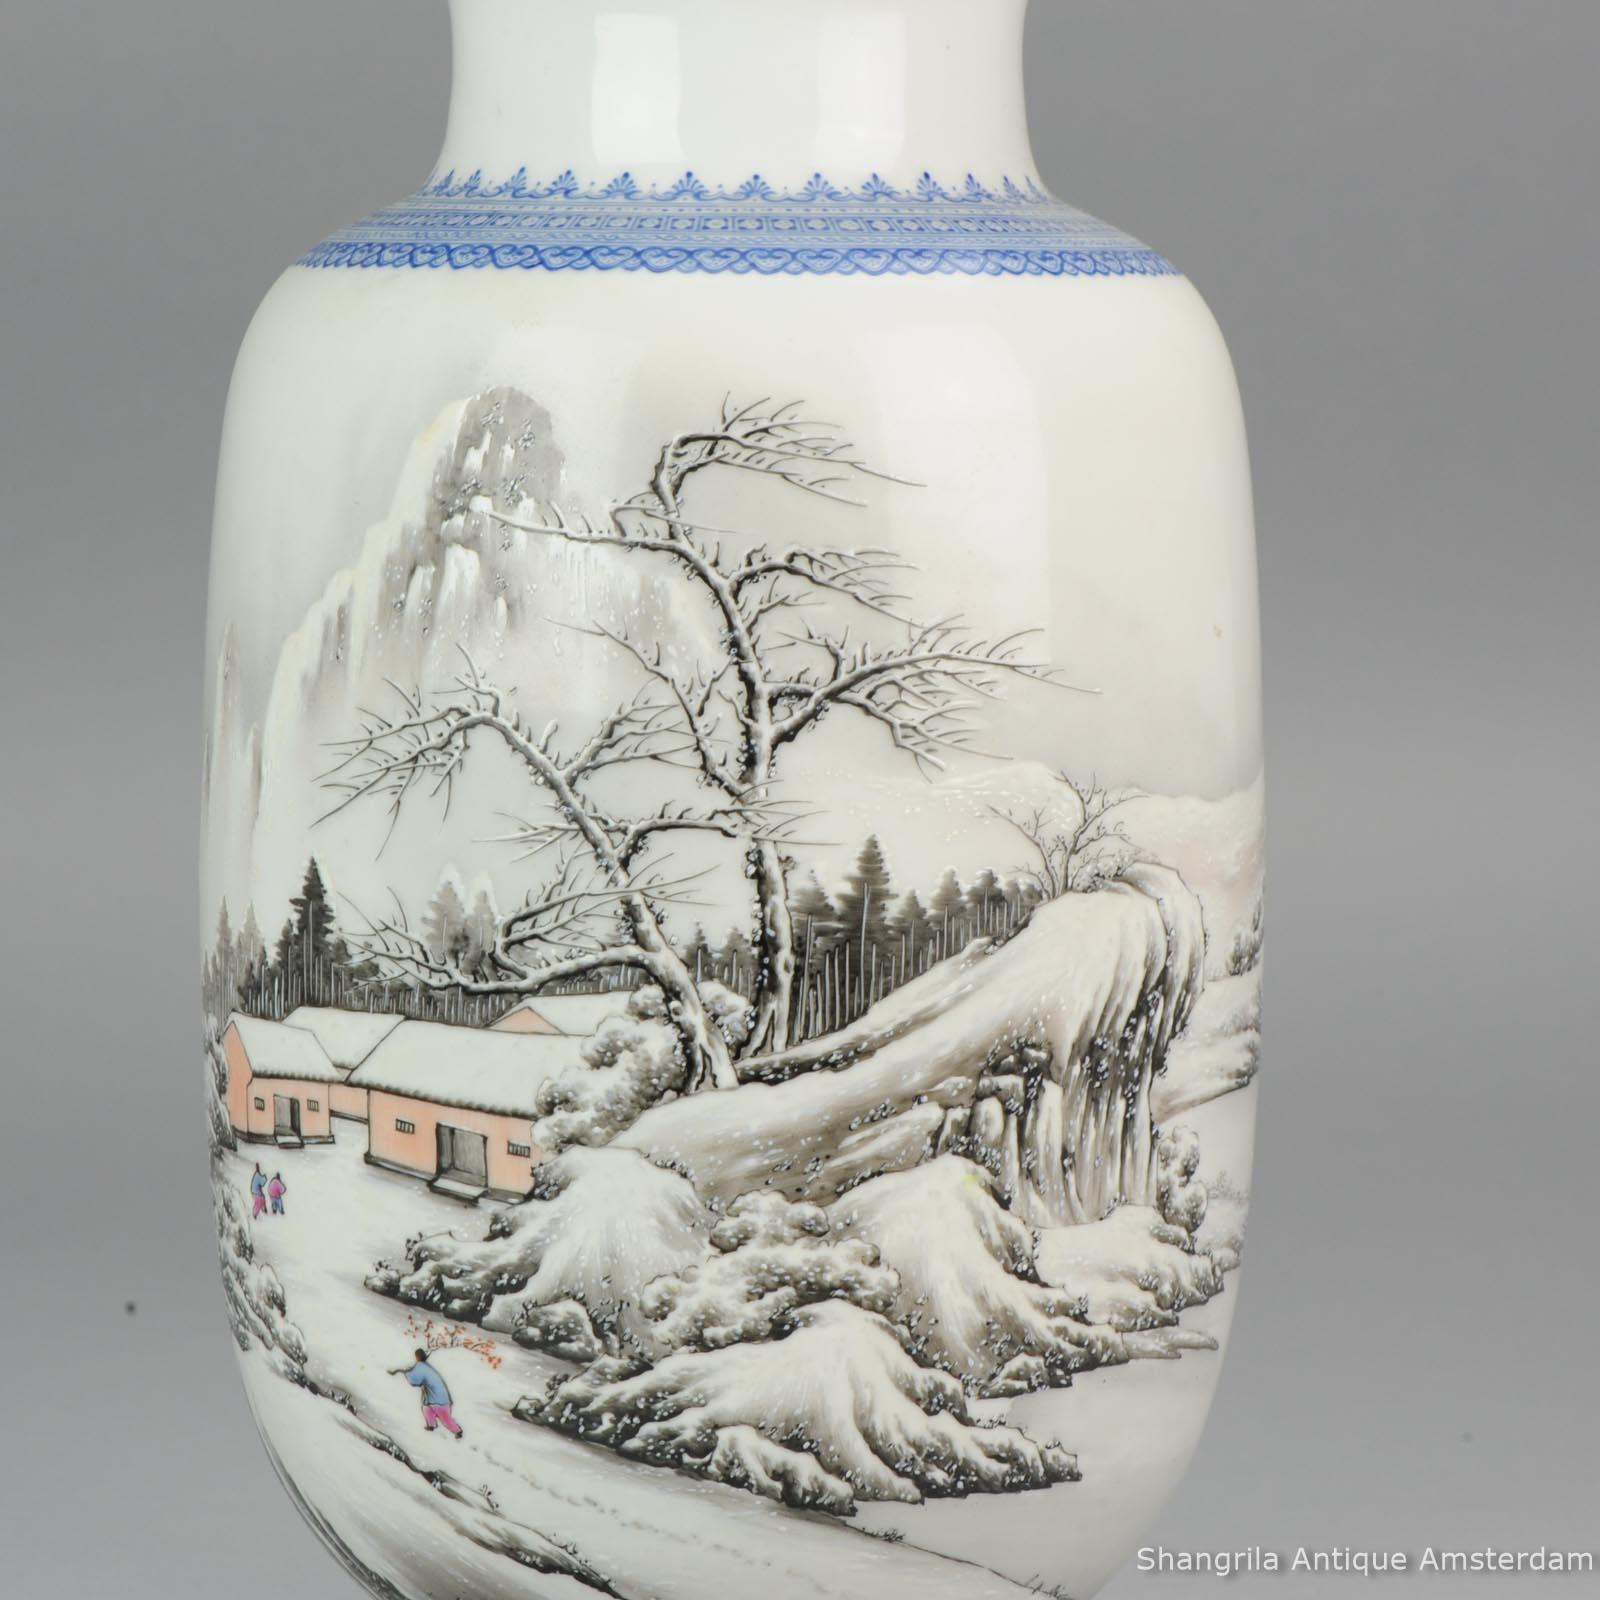 Great winter landscape. Lovely vases with nice scene, Very high quality of painting. Very rare to find this type of vases in such a large size. We like them so much that we actually do not want to sell them.

Condition:
Overall condition A & D. 1